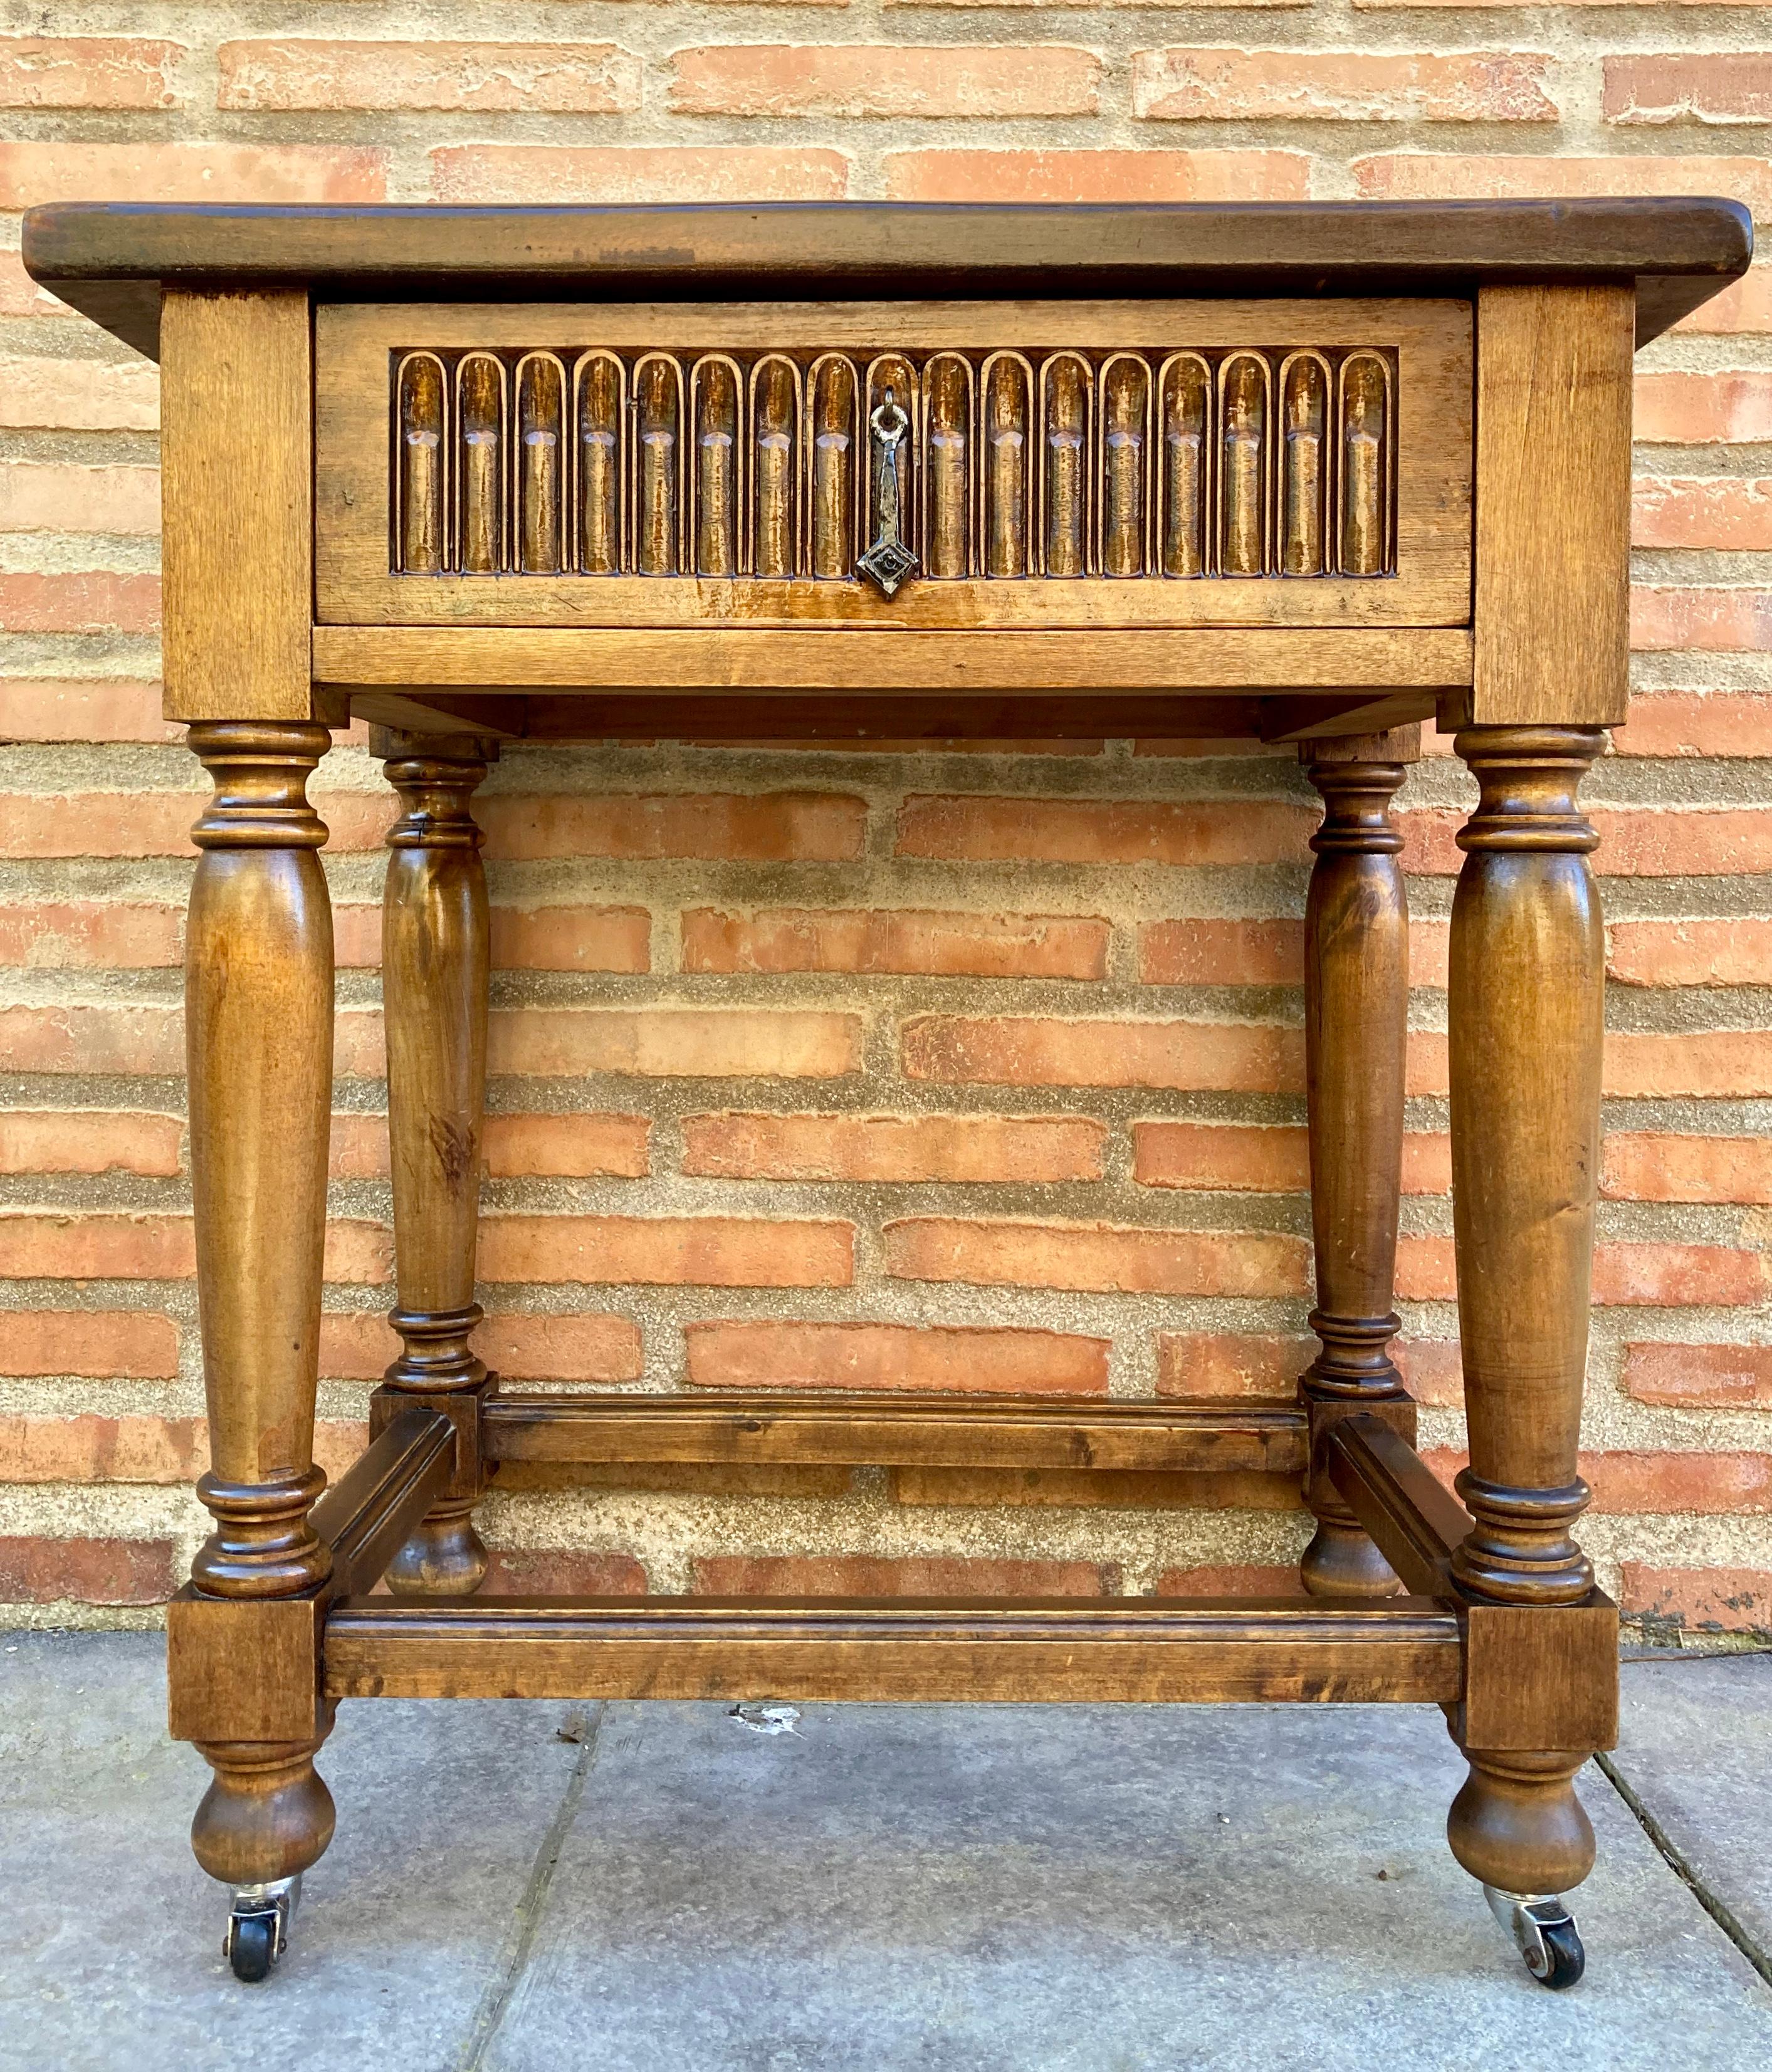 Late 19th century French walnut side table, with one drawer, decorated with arches and column legs on wheels. Born in France during the last years of the 19th century, this beautiful walnut side table has a rectangular top, placed on a single